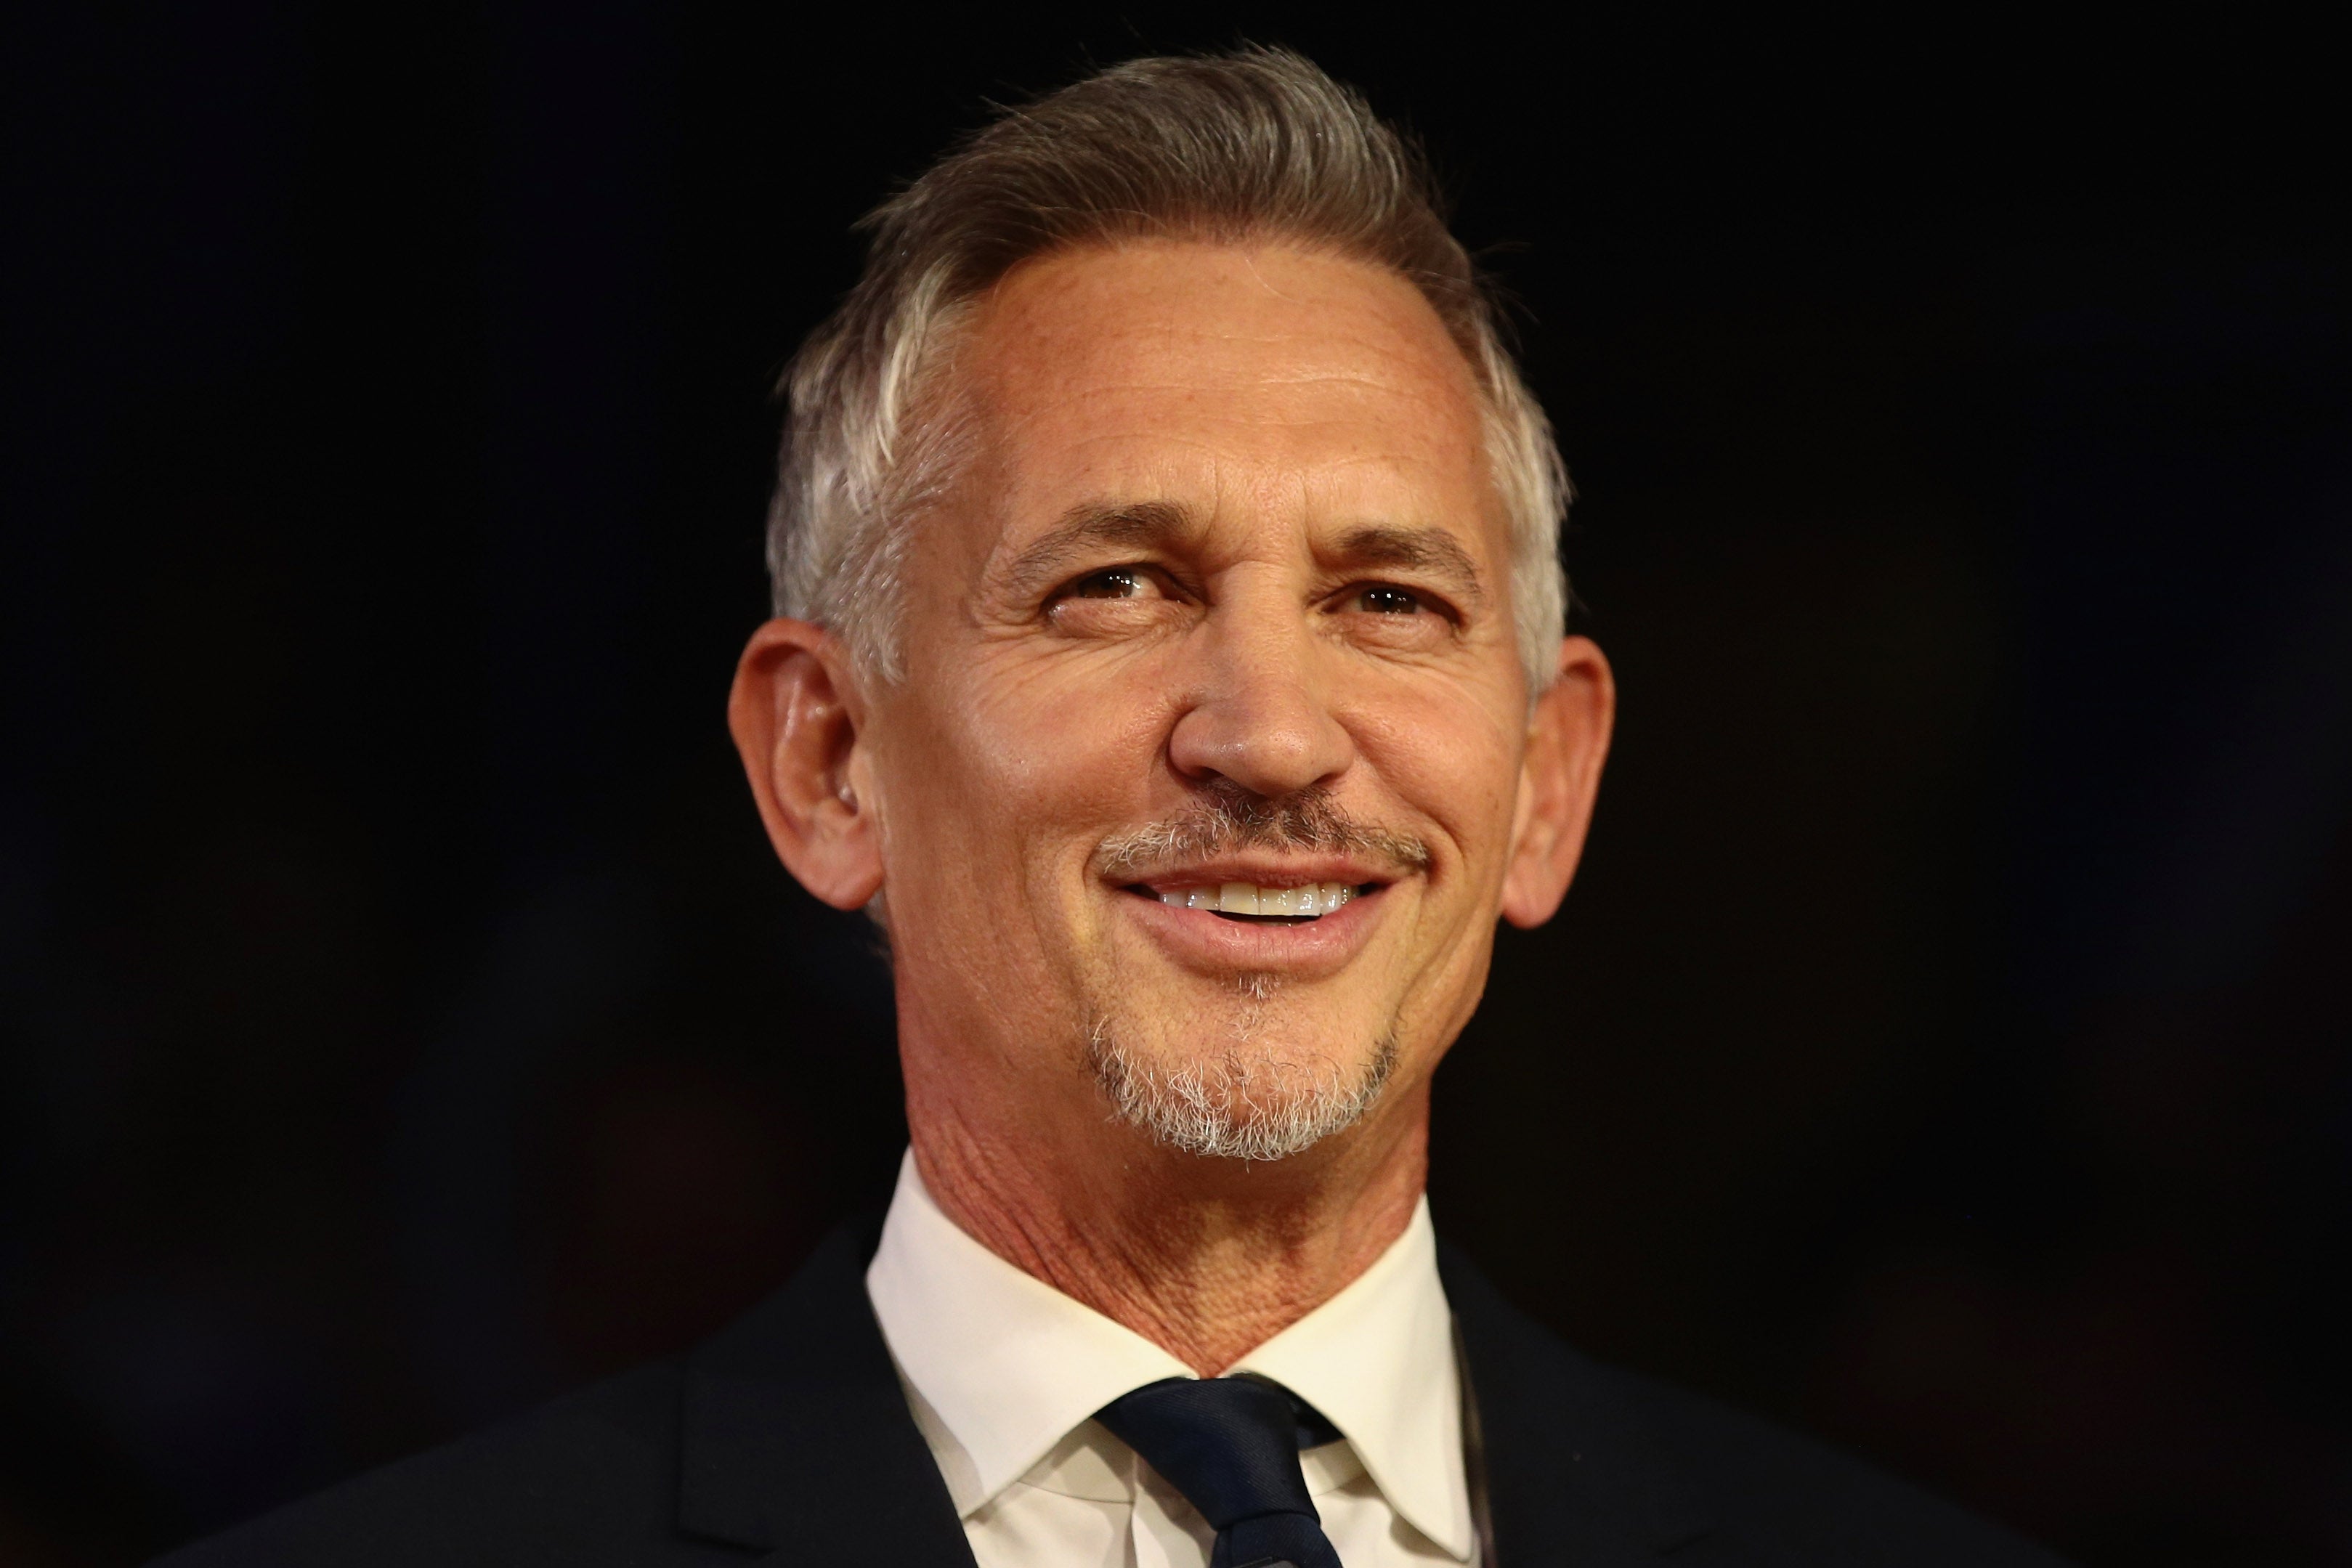 Gary Lineker admits concern over football’s link to dementia